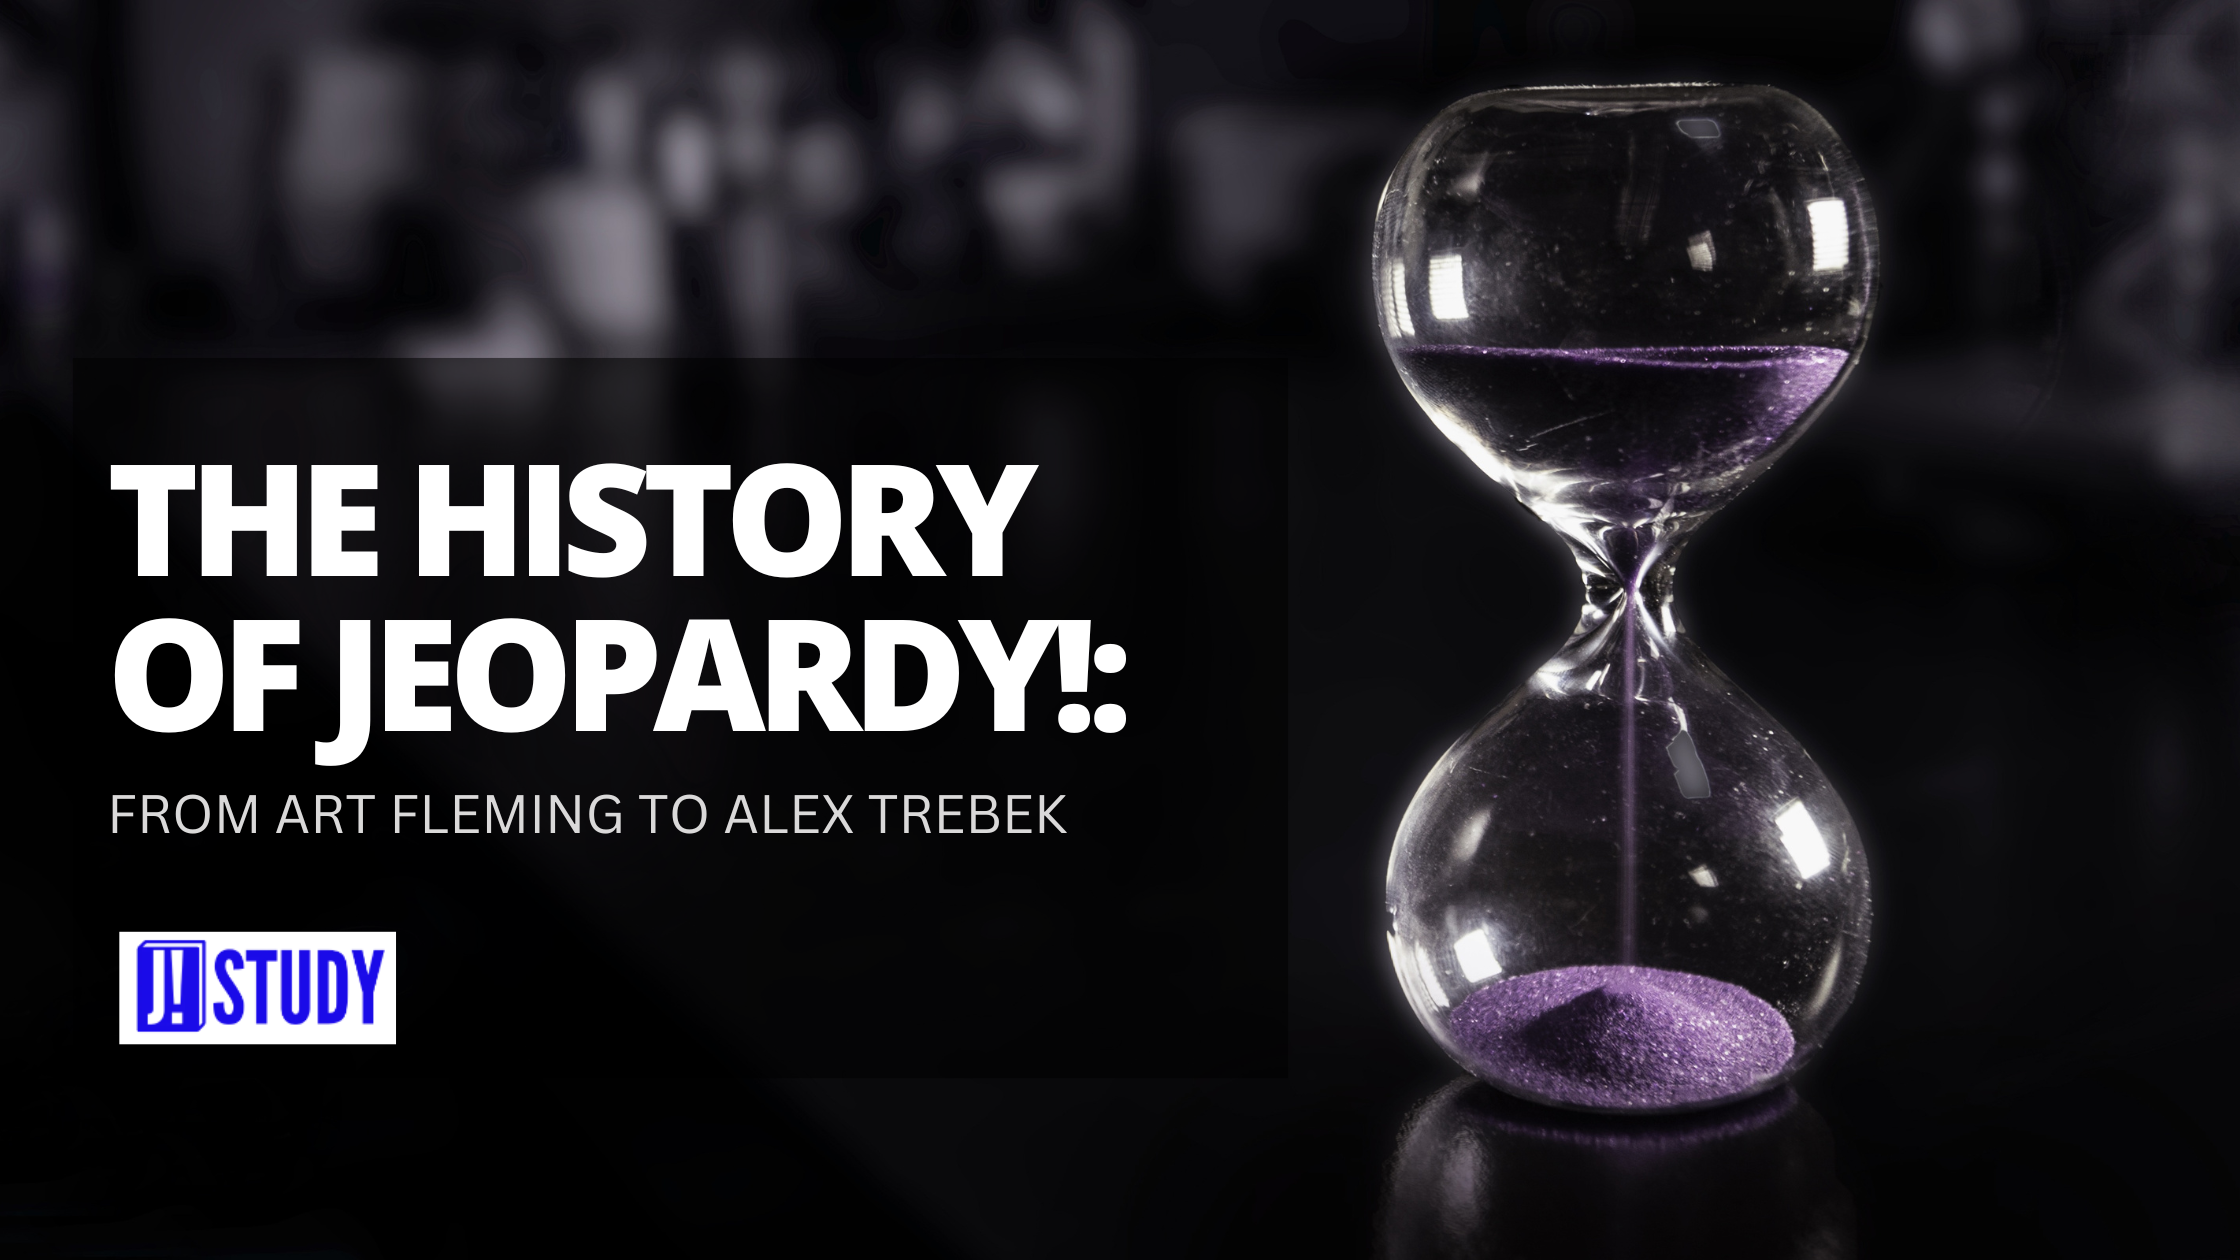 The History of Jeopardy!: From Art Fleming to Alex Trebek